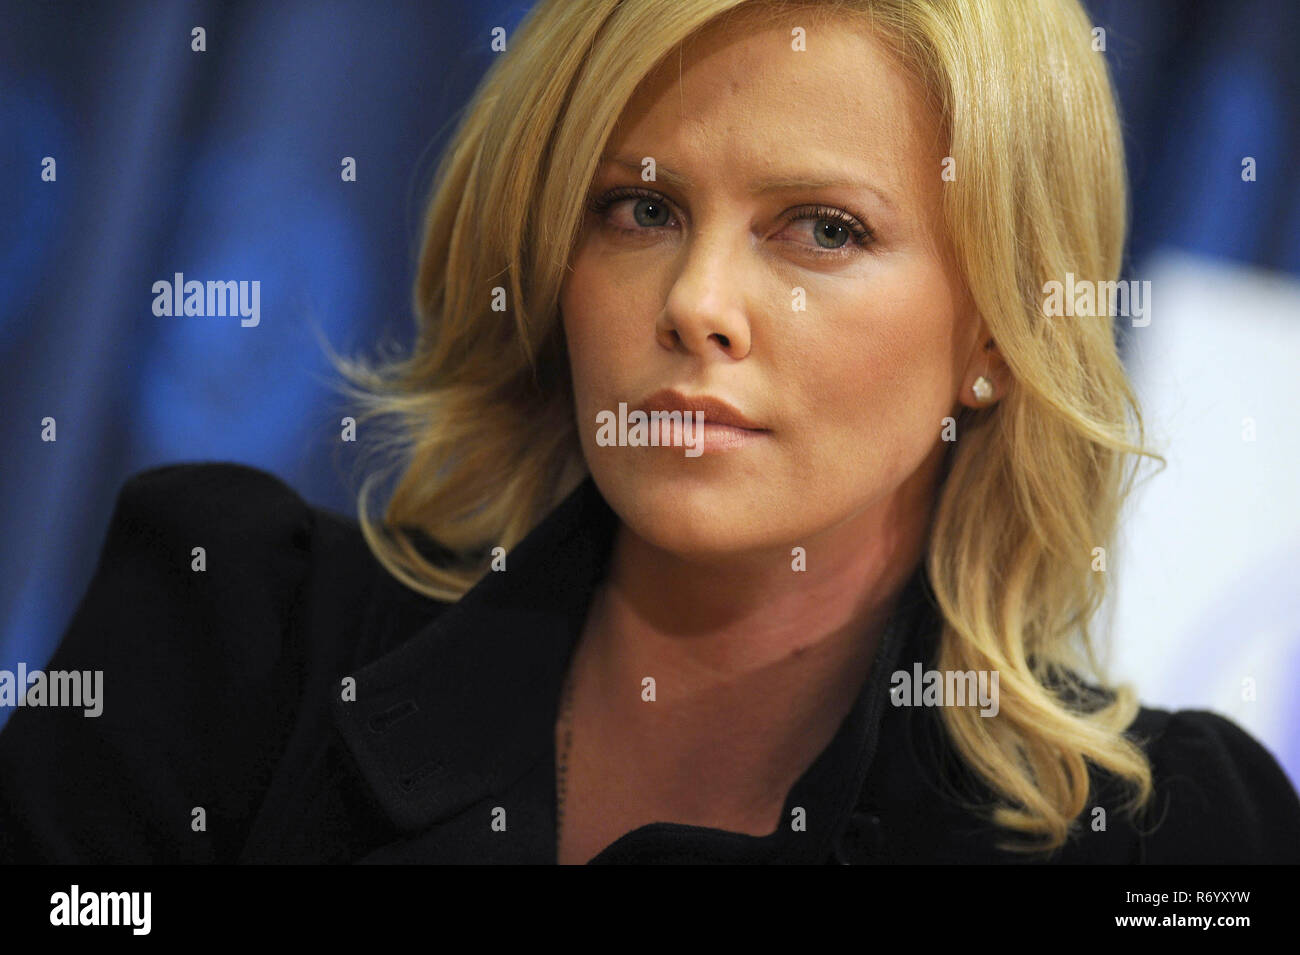 Charlize Theron speaks at a panel discussion following the UN Messenger of Peace induction ceremony at The United Nations. New York City. November 17, 2008 Credit: Dennis Van Tine/MediaPunch Stock Photo